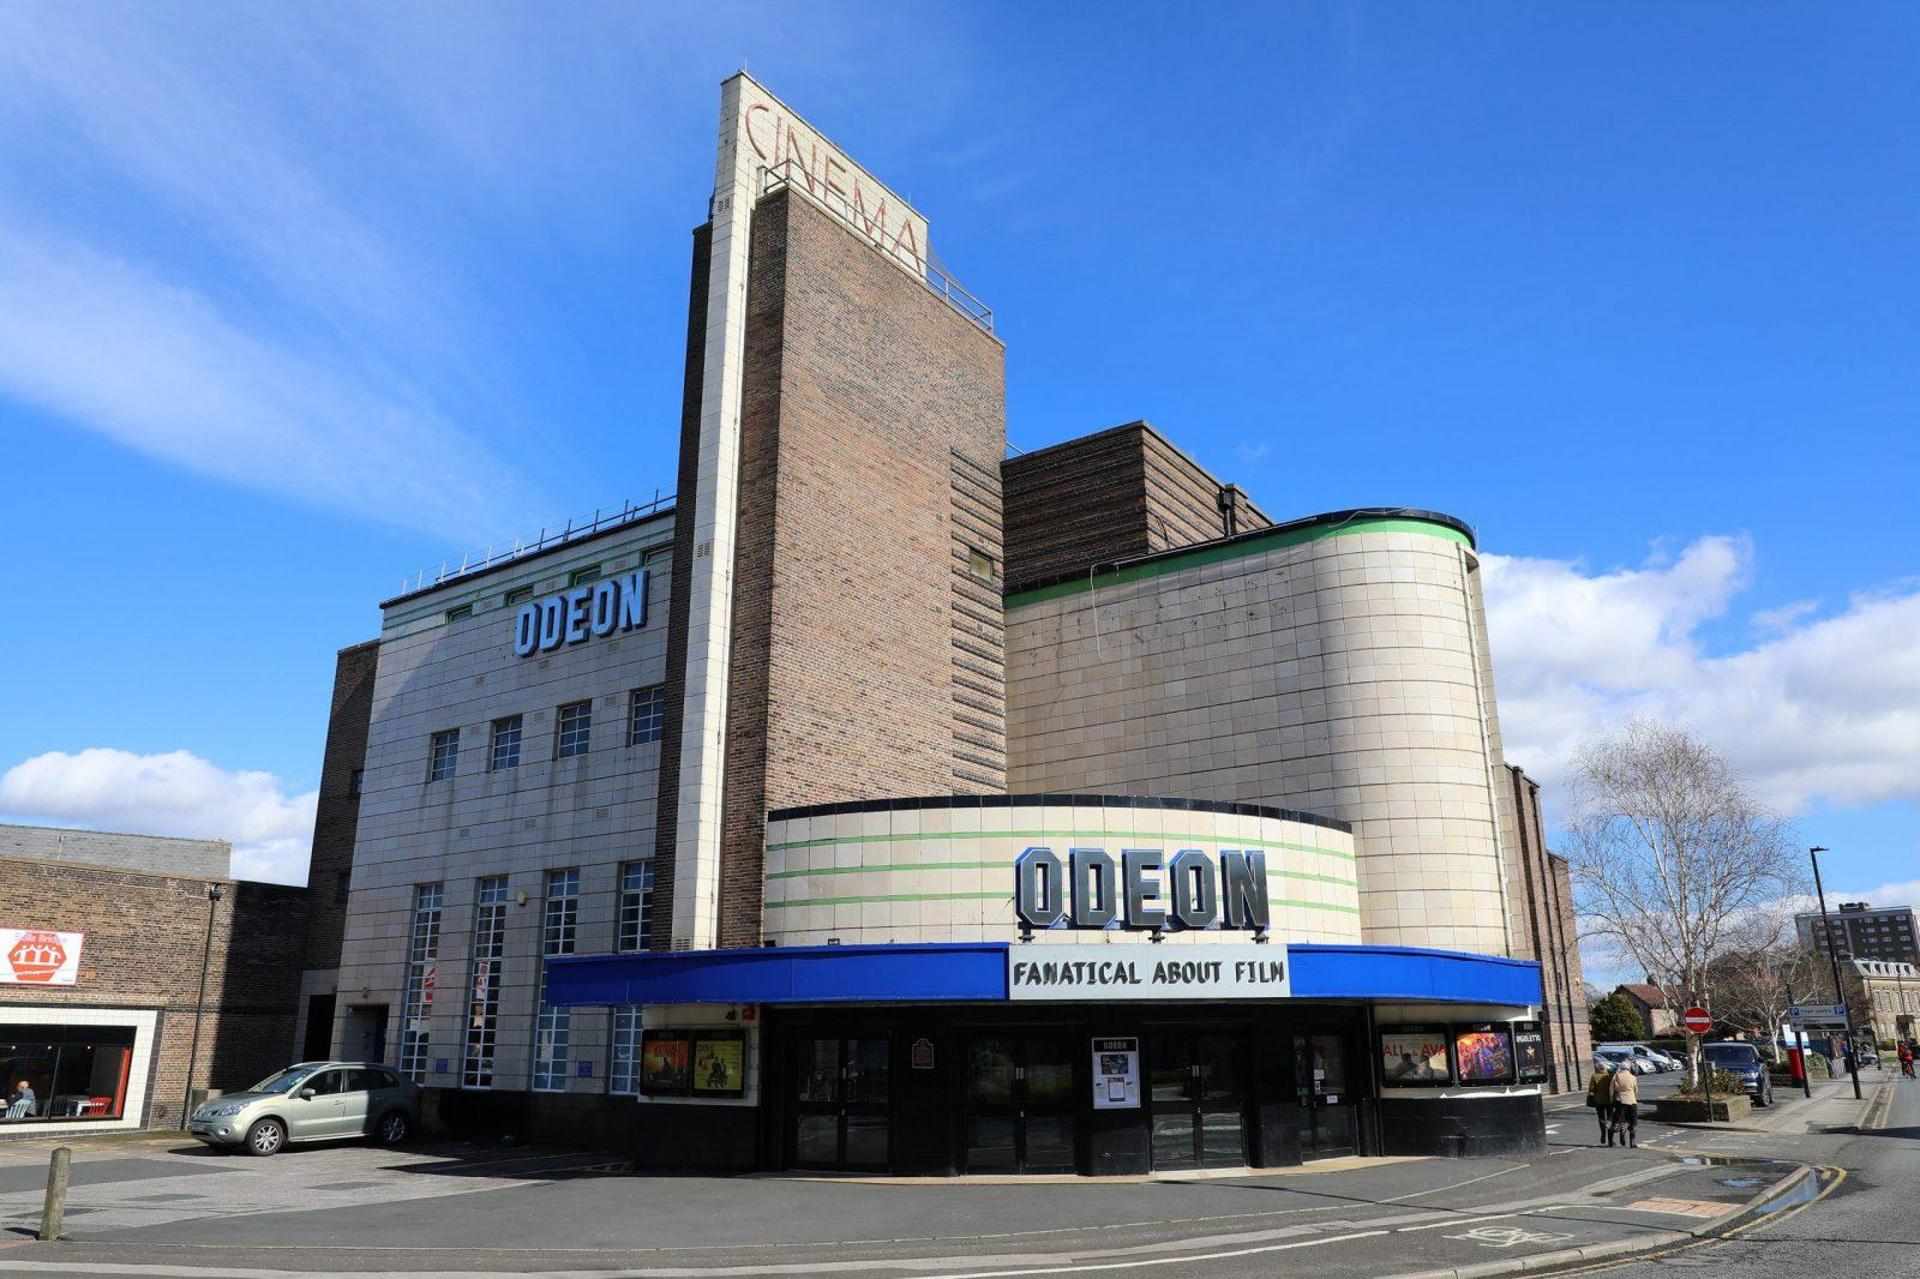 Harrogate Odeon cinema goes up for sale for £7m+